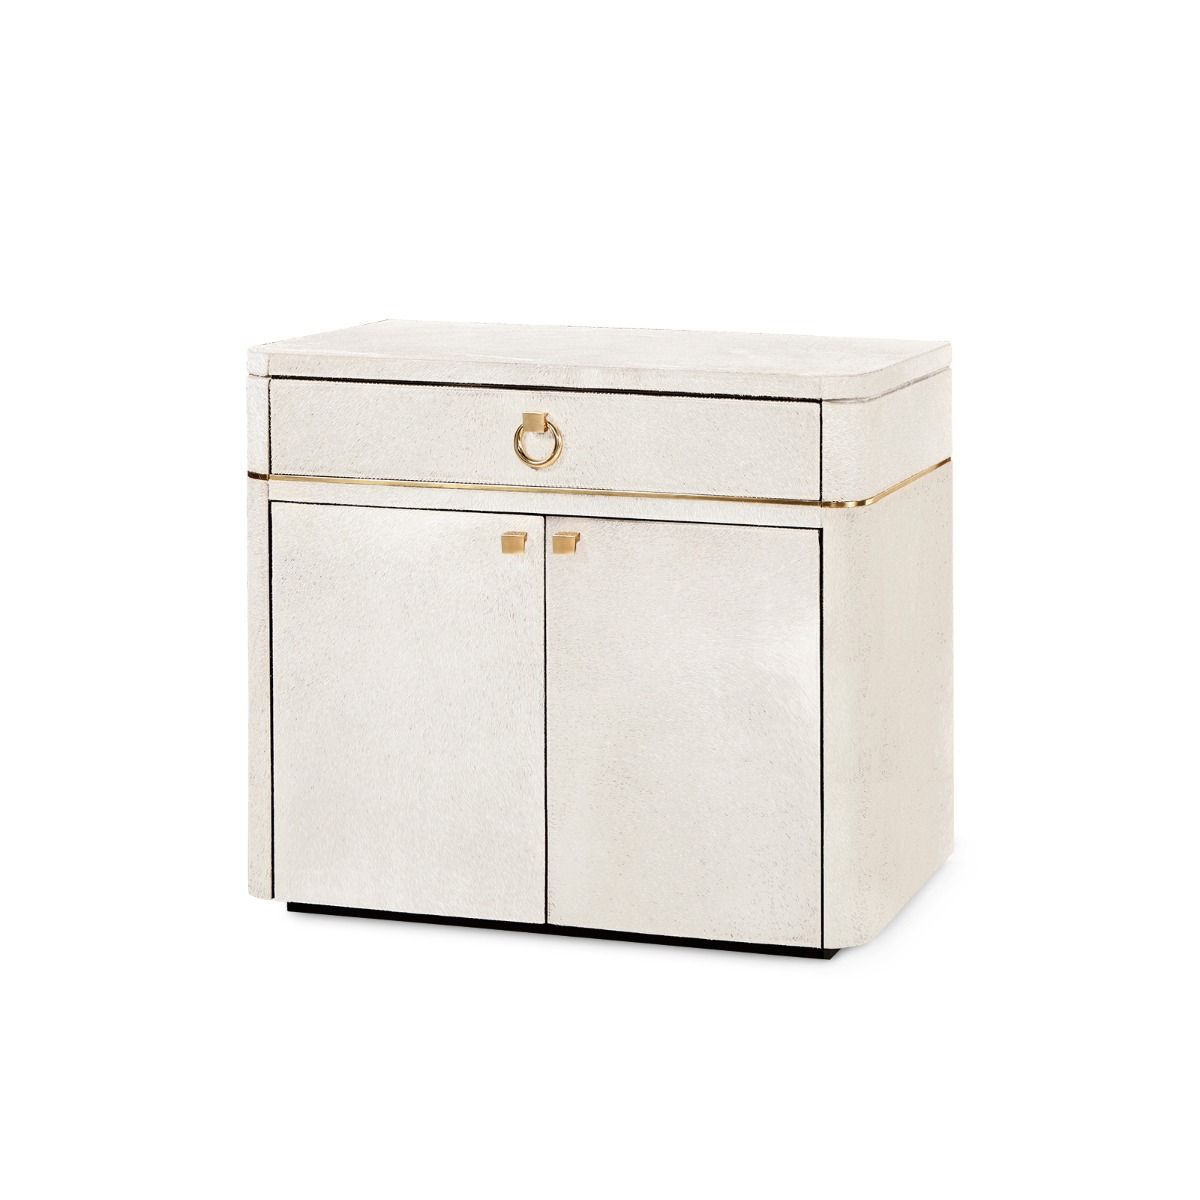 Load image into Gallery viewer, Andre Cabinet WhiteCabinet Bungalow 5  White   Four Hands, Burke Decor, Mid Century Modern Furniture, Old Bones Furniture Company, Old Bones Co, Modern Mid Century, Designer Furniture, https://www.oldbonesco.com/
